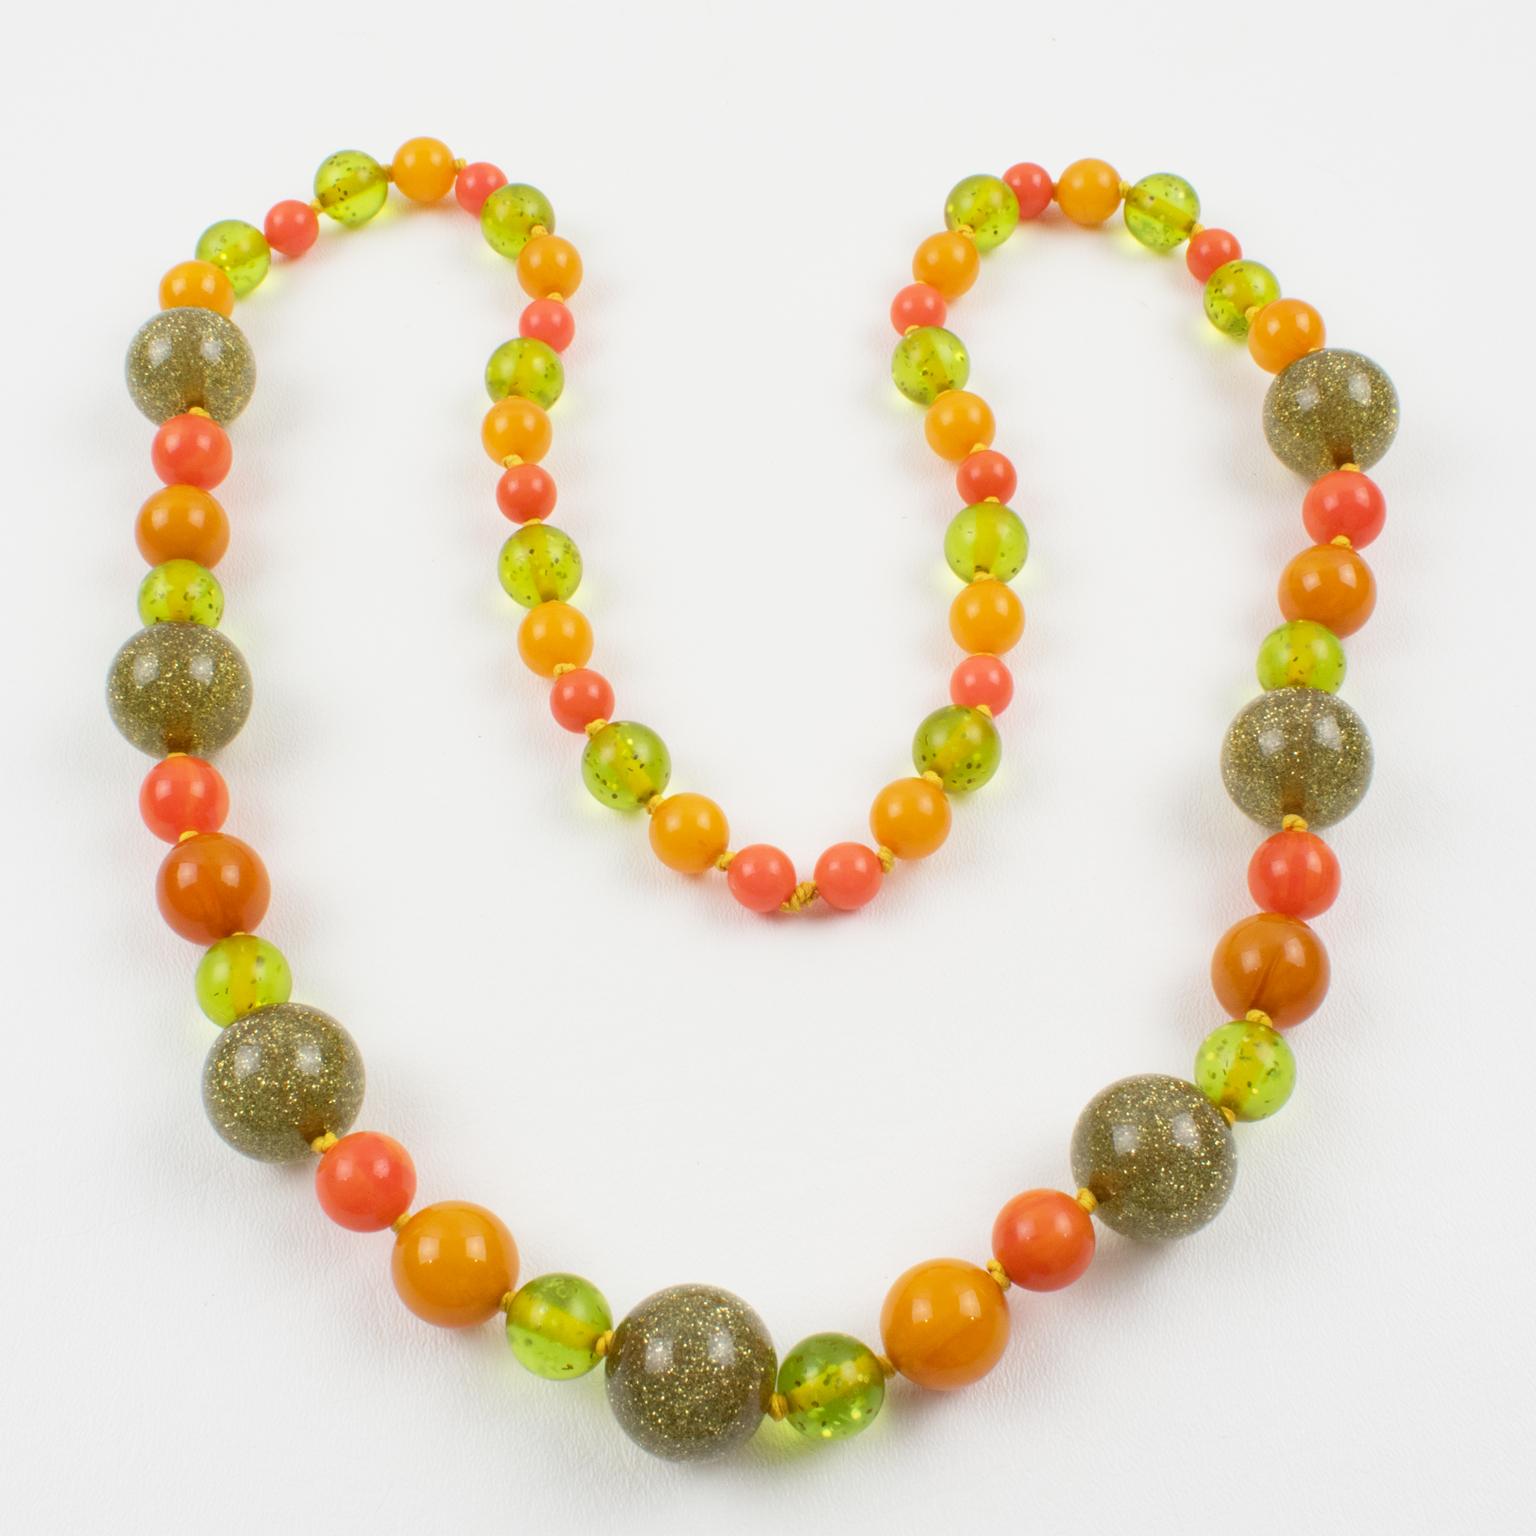 This superb extra-long Bakelite and Lucite beaded necklace was crafted in the 1980s with beads from the 1950s. The rounded beads have assorted sizes, and some have a pattern. Mix and match glittering colors boast burnt orange marble, tangerine